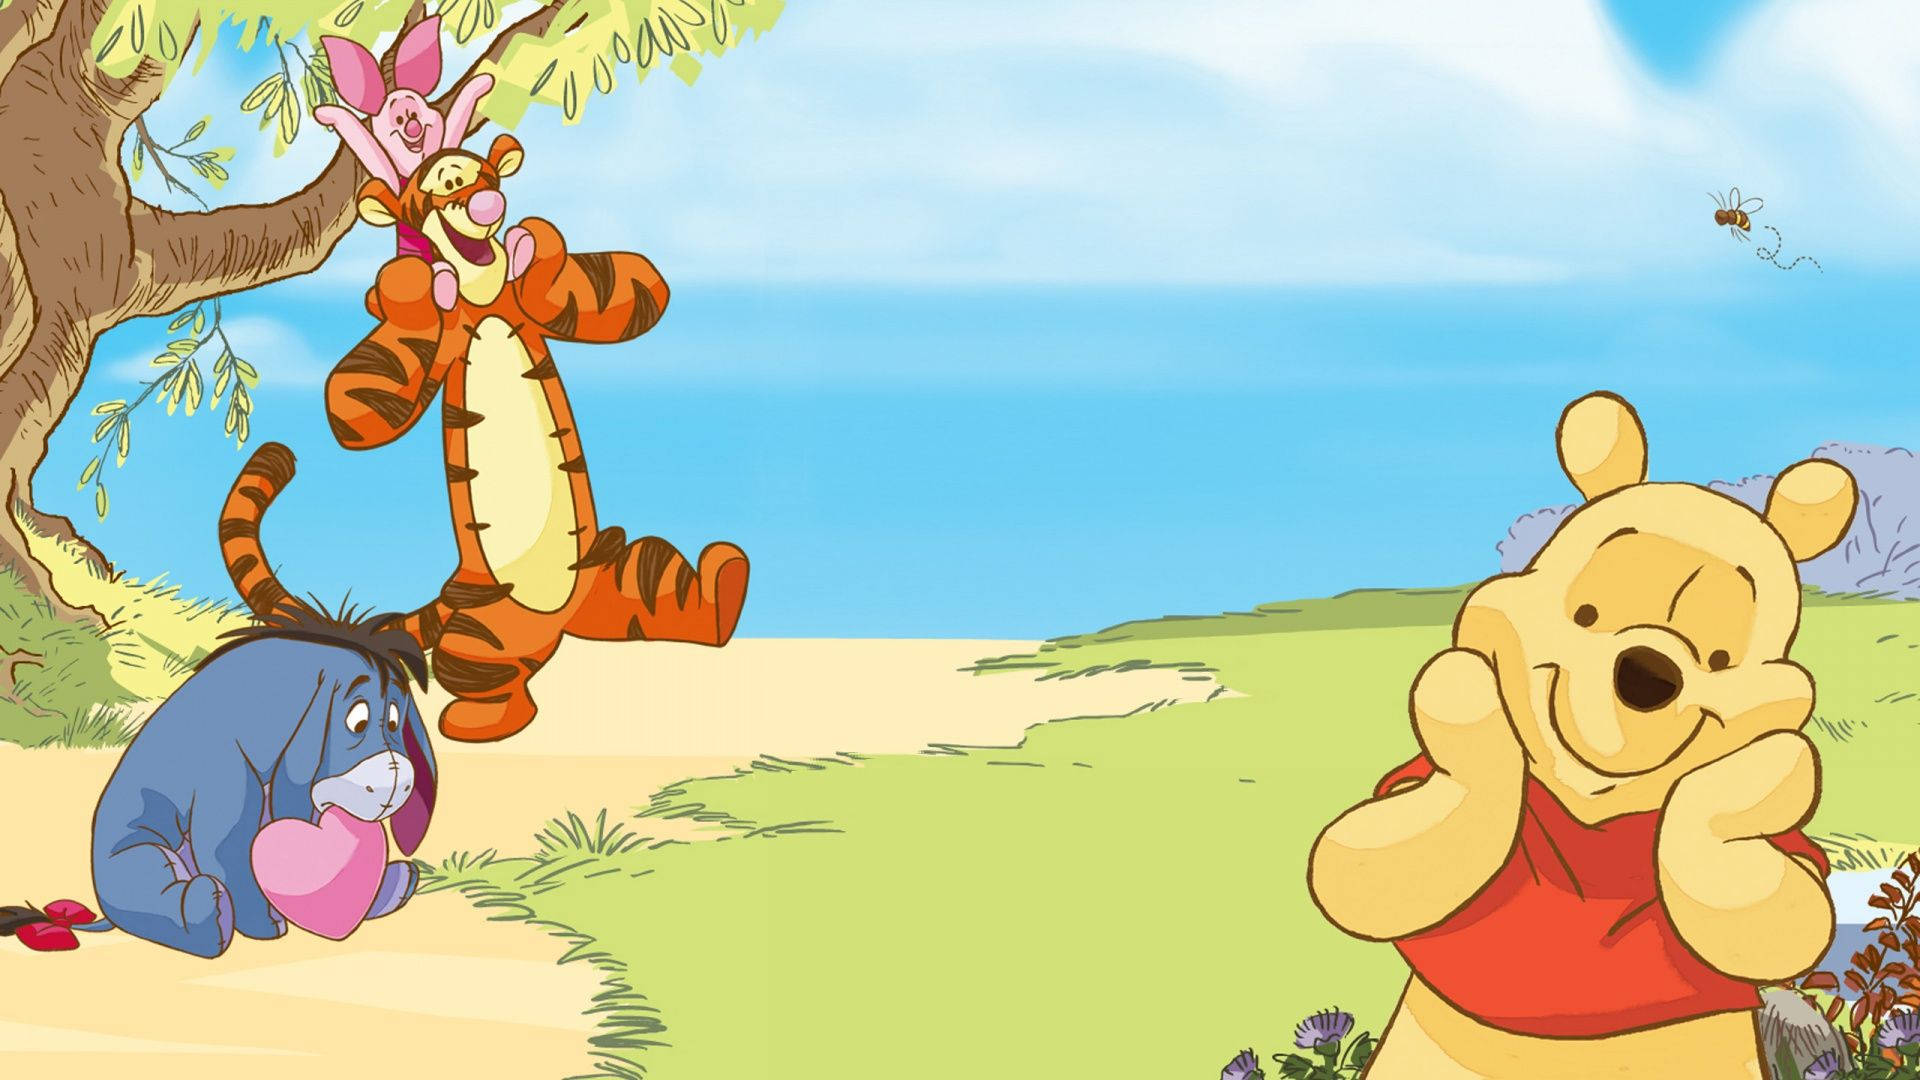 Winnie The Pooh and Friends Sharing a Special Moment Wallpaper